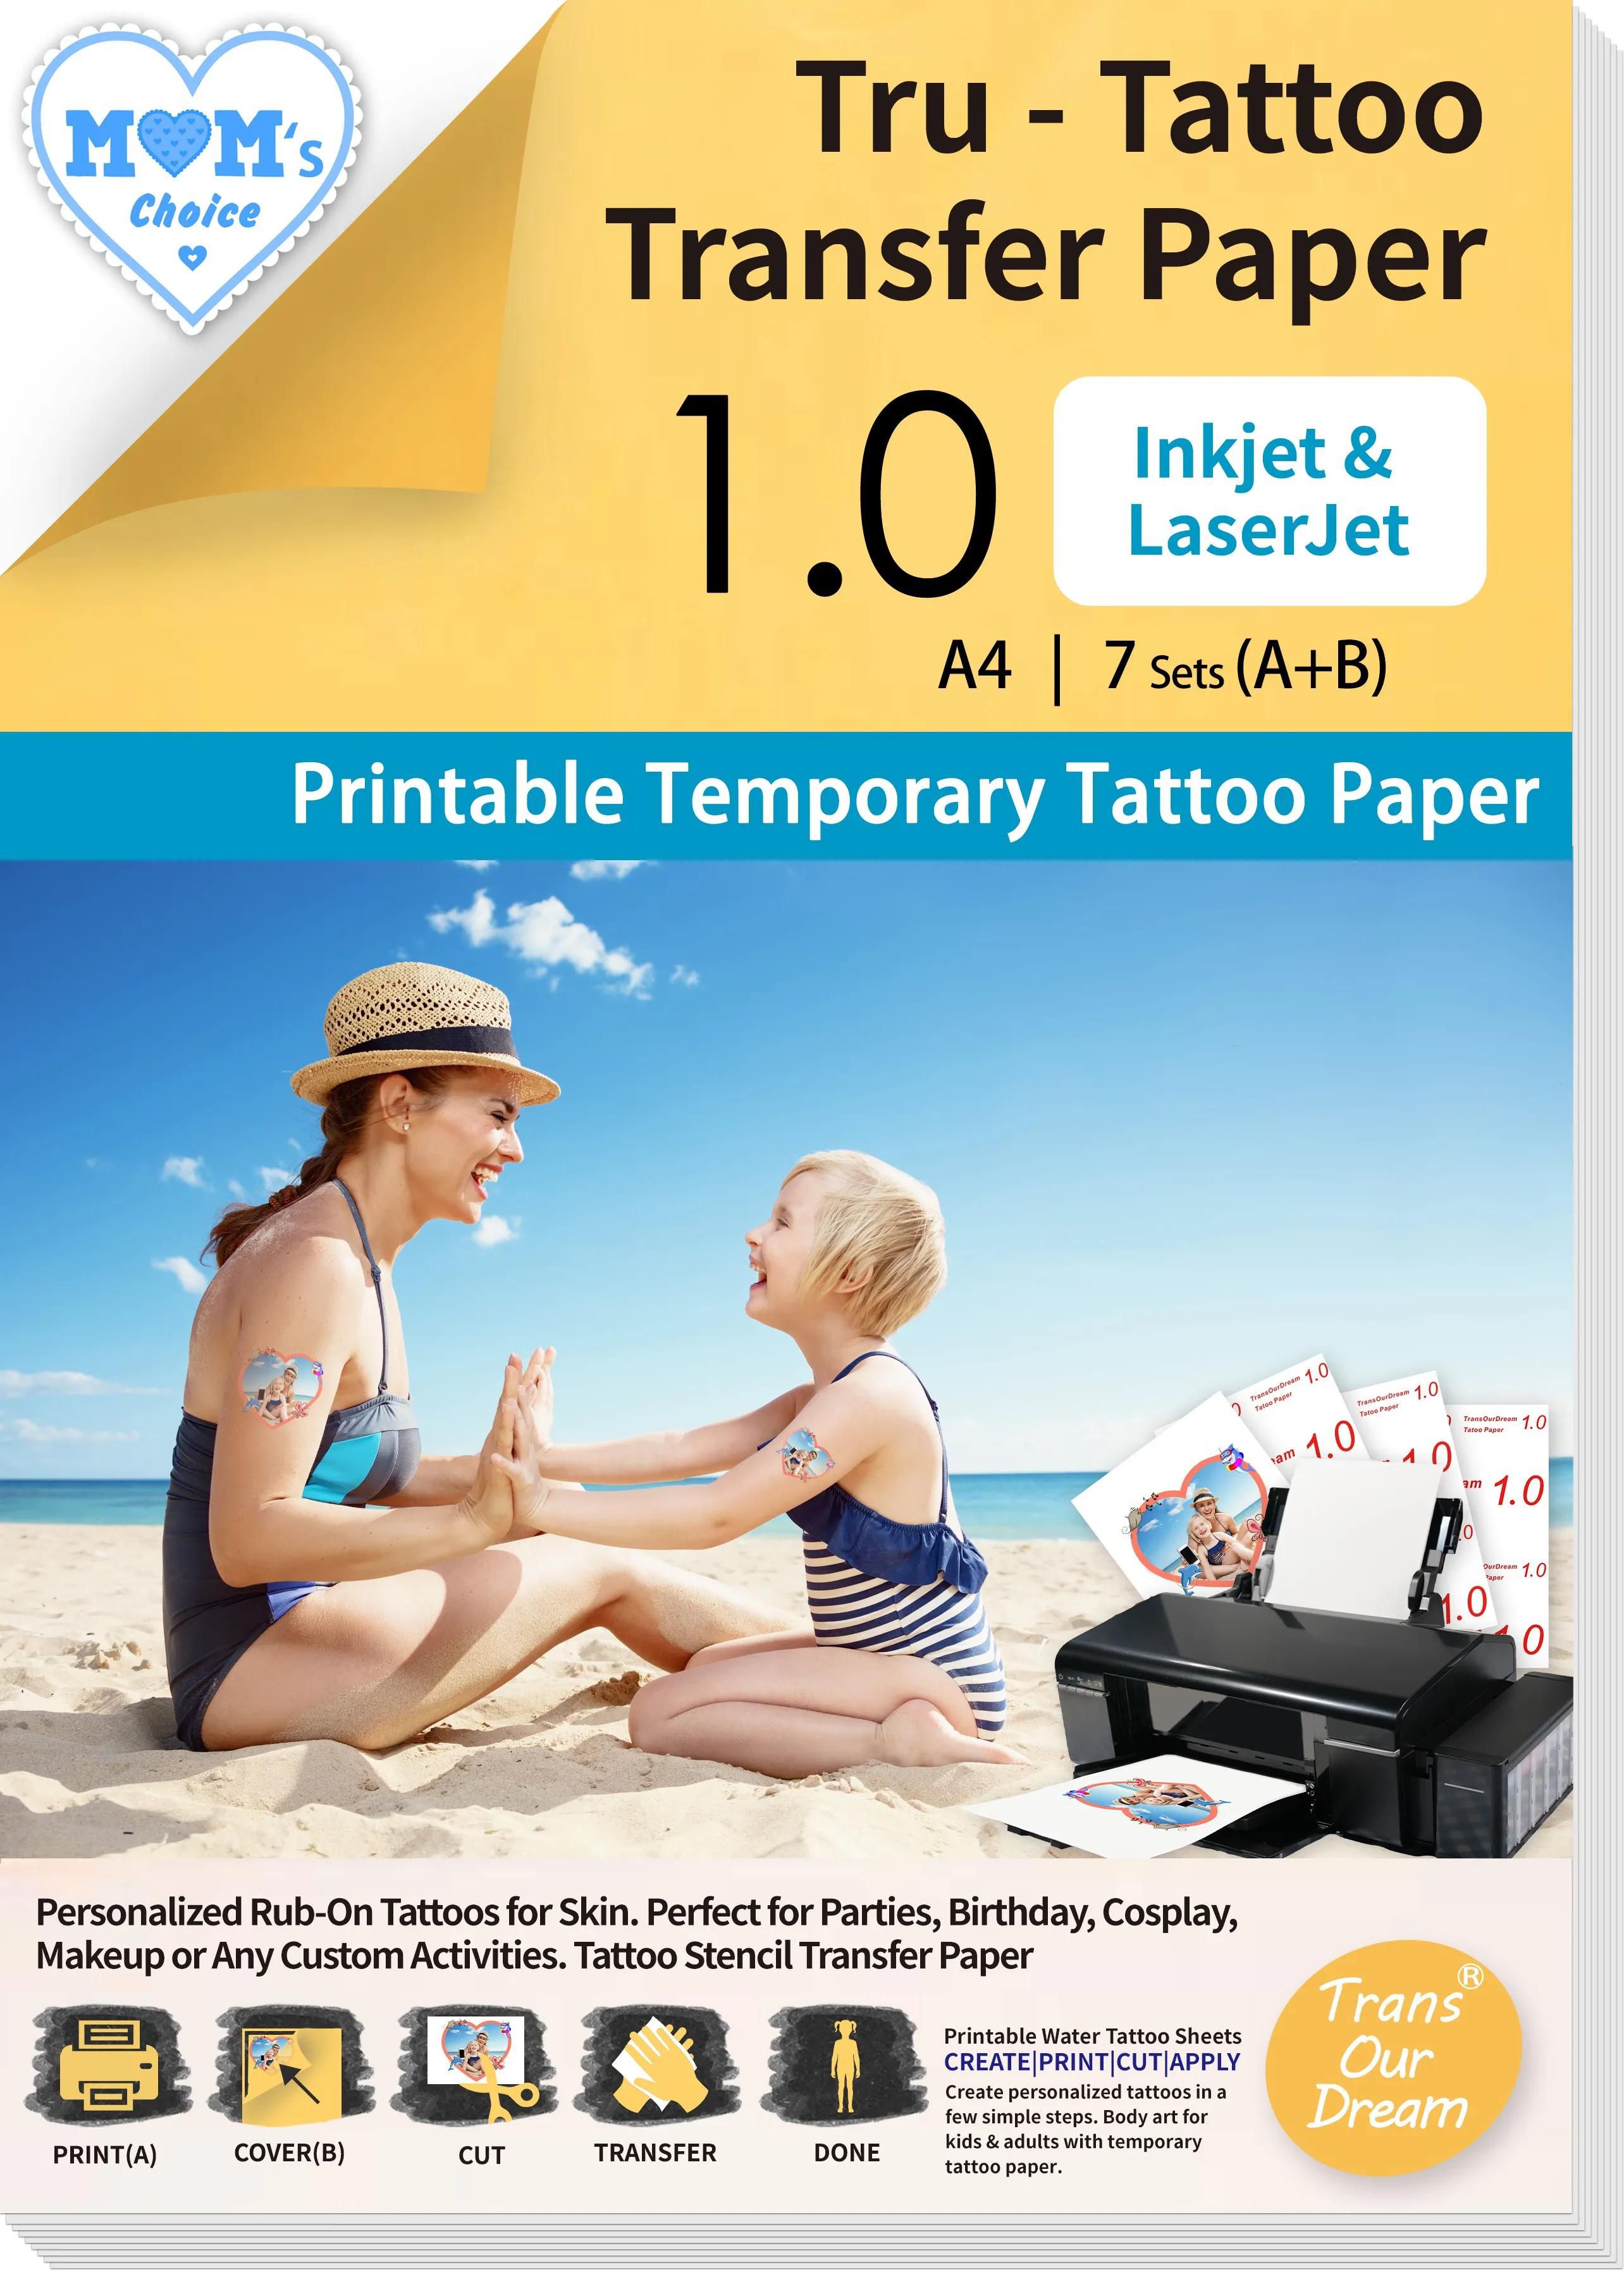 TransOurDream Printable Temporary Tattoo Transfer Paper for Inkjet & Laser Printer (A+B per Set,5 Sets, A4 size) DIY Personalized Tattoo Paper for Skin